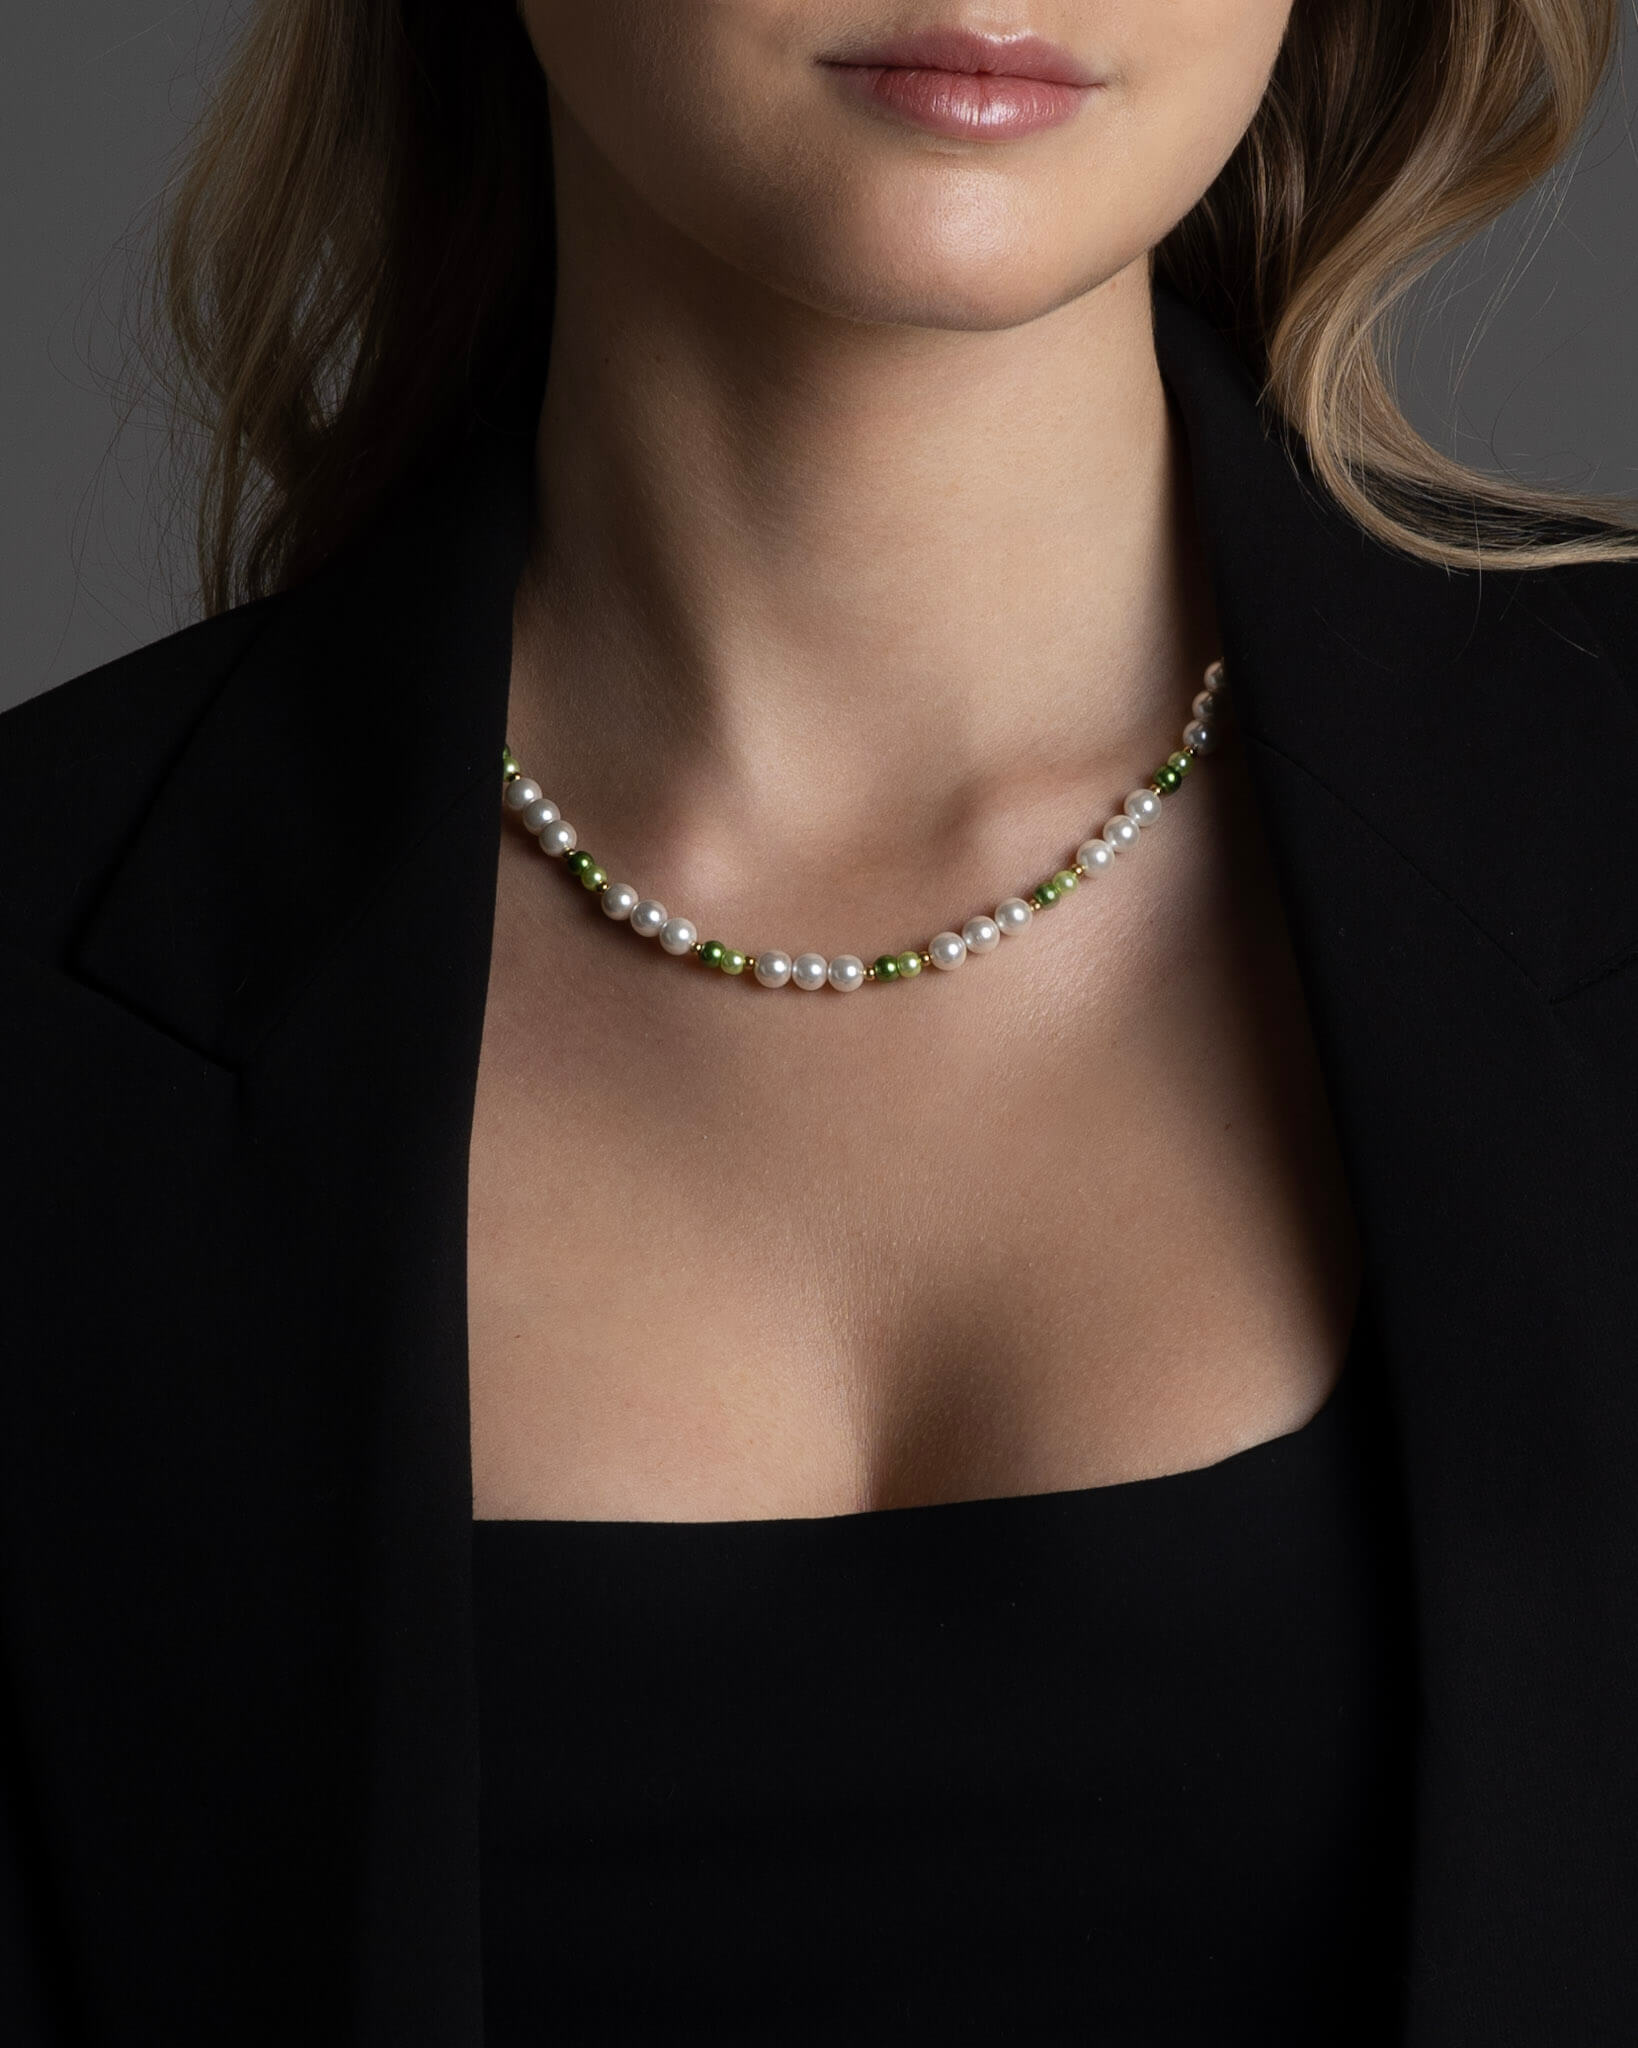 Women wearing the FIVE JWLRY pearls necklace made with 2 shades of green glass beads and white pearls, crafted with natural shell. 45cm + 5cm extension, 14k gold rollo chain for adjustment. Fashion accessory, statement jewelry. Designed in Montreal, Canada.